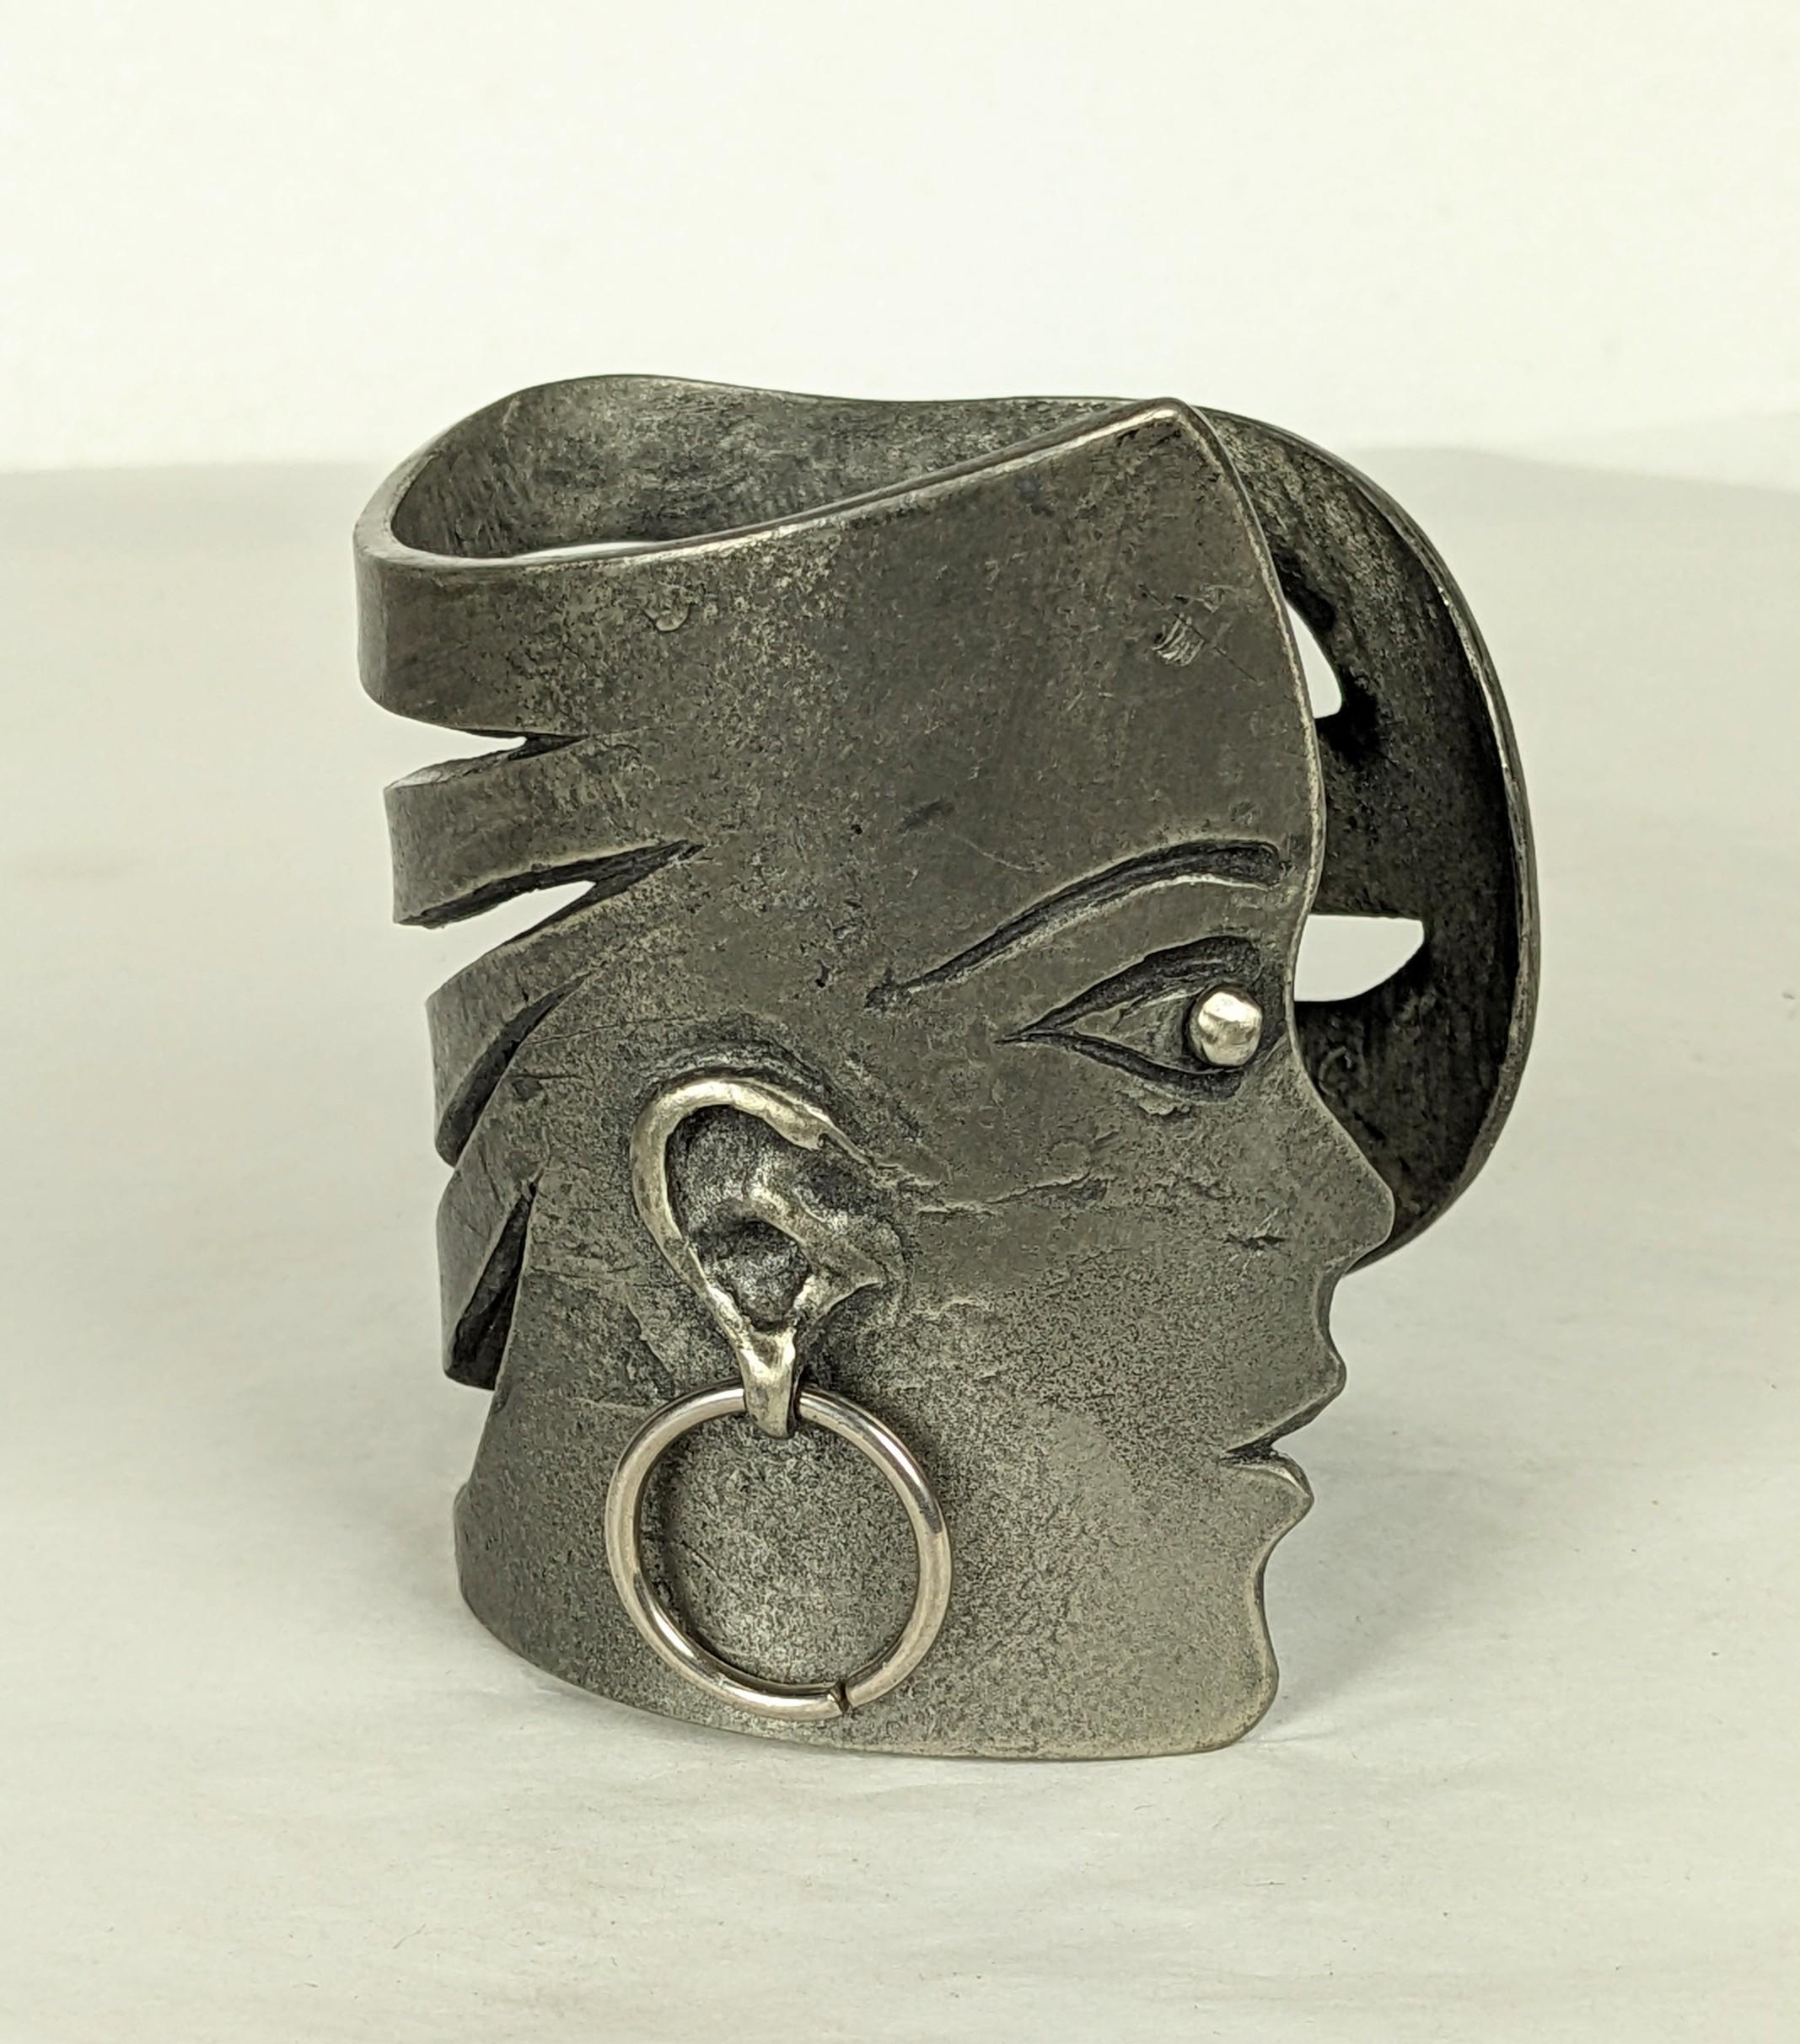 Rare Jean Charles de Castelbajac Figural Runway Cuff from the 1980's. Patinaed silvered metal created by D. Roux for Castelbajac. A female face motif with pierced wavy hair which wraps around wrist. 2.75